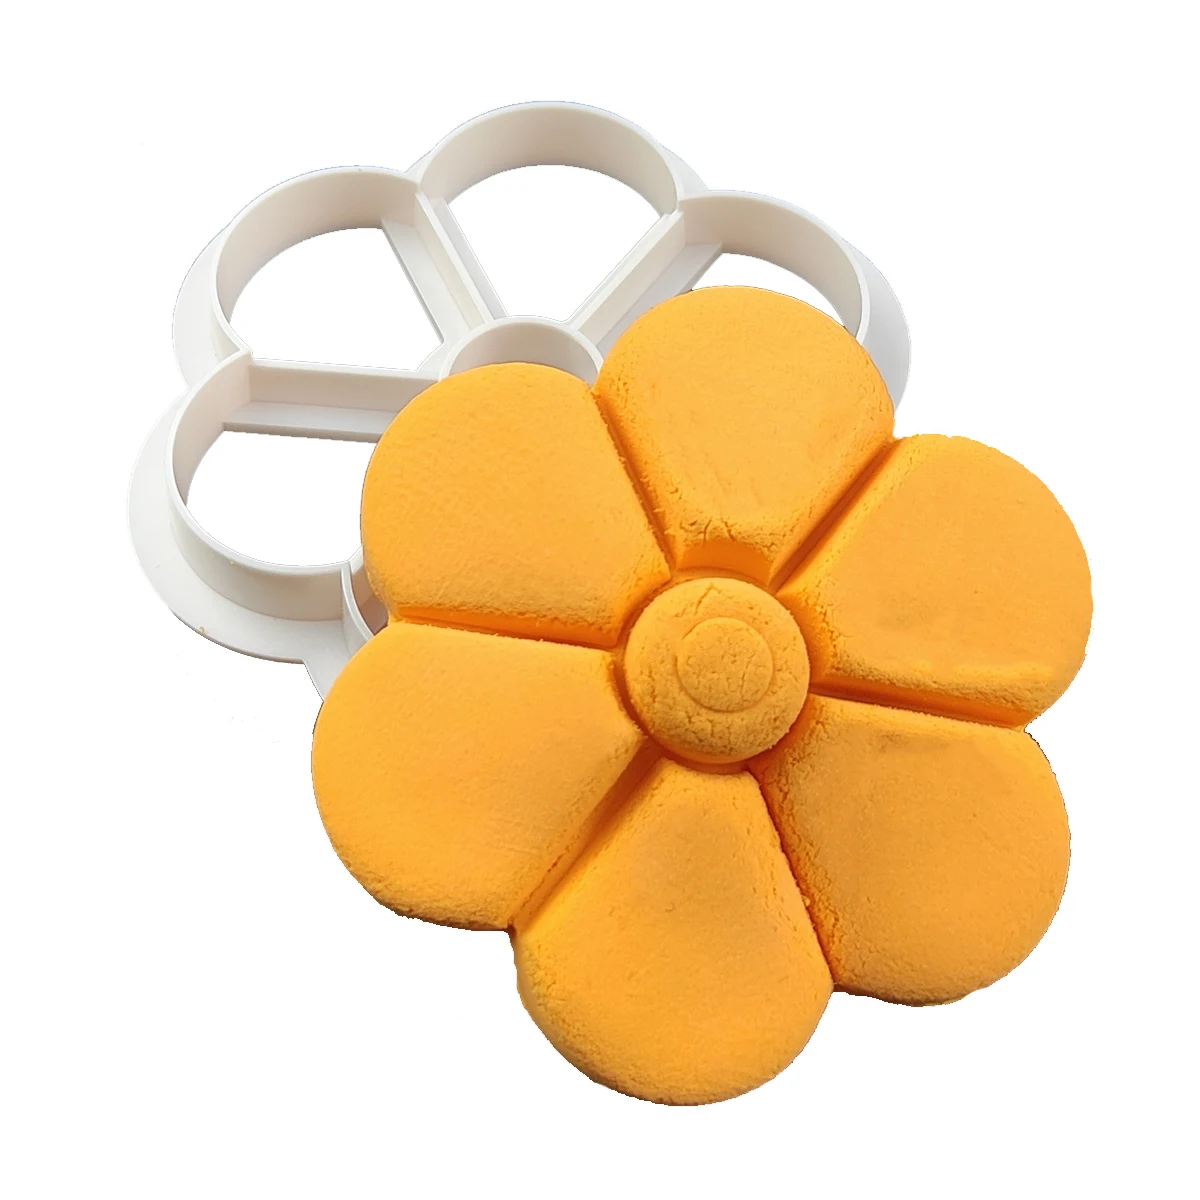 

Plum Blossom Type Biscuit Cookie Cutter Fondant Cake Decorating Mold DIY Chocolates Moulds Wedding Flower Kitchen Baking Tools